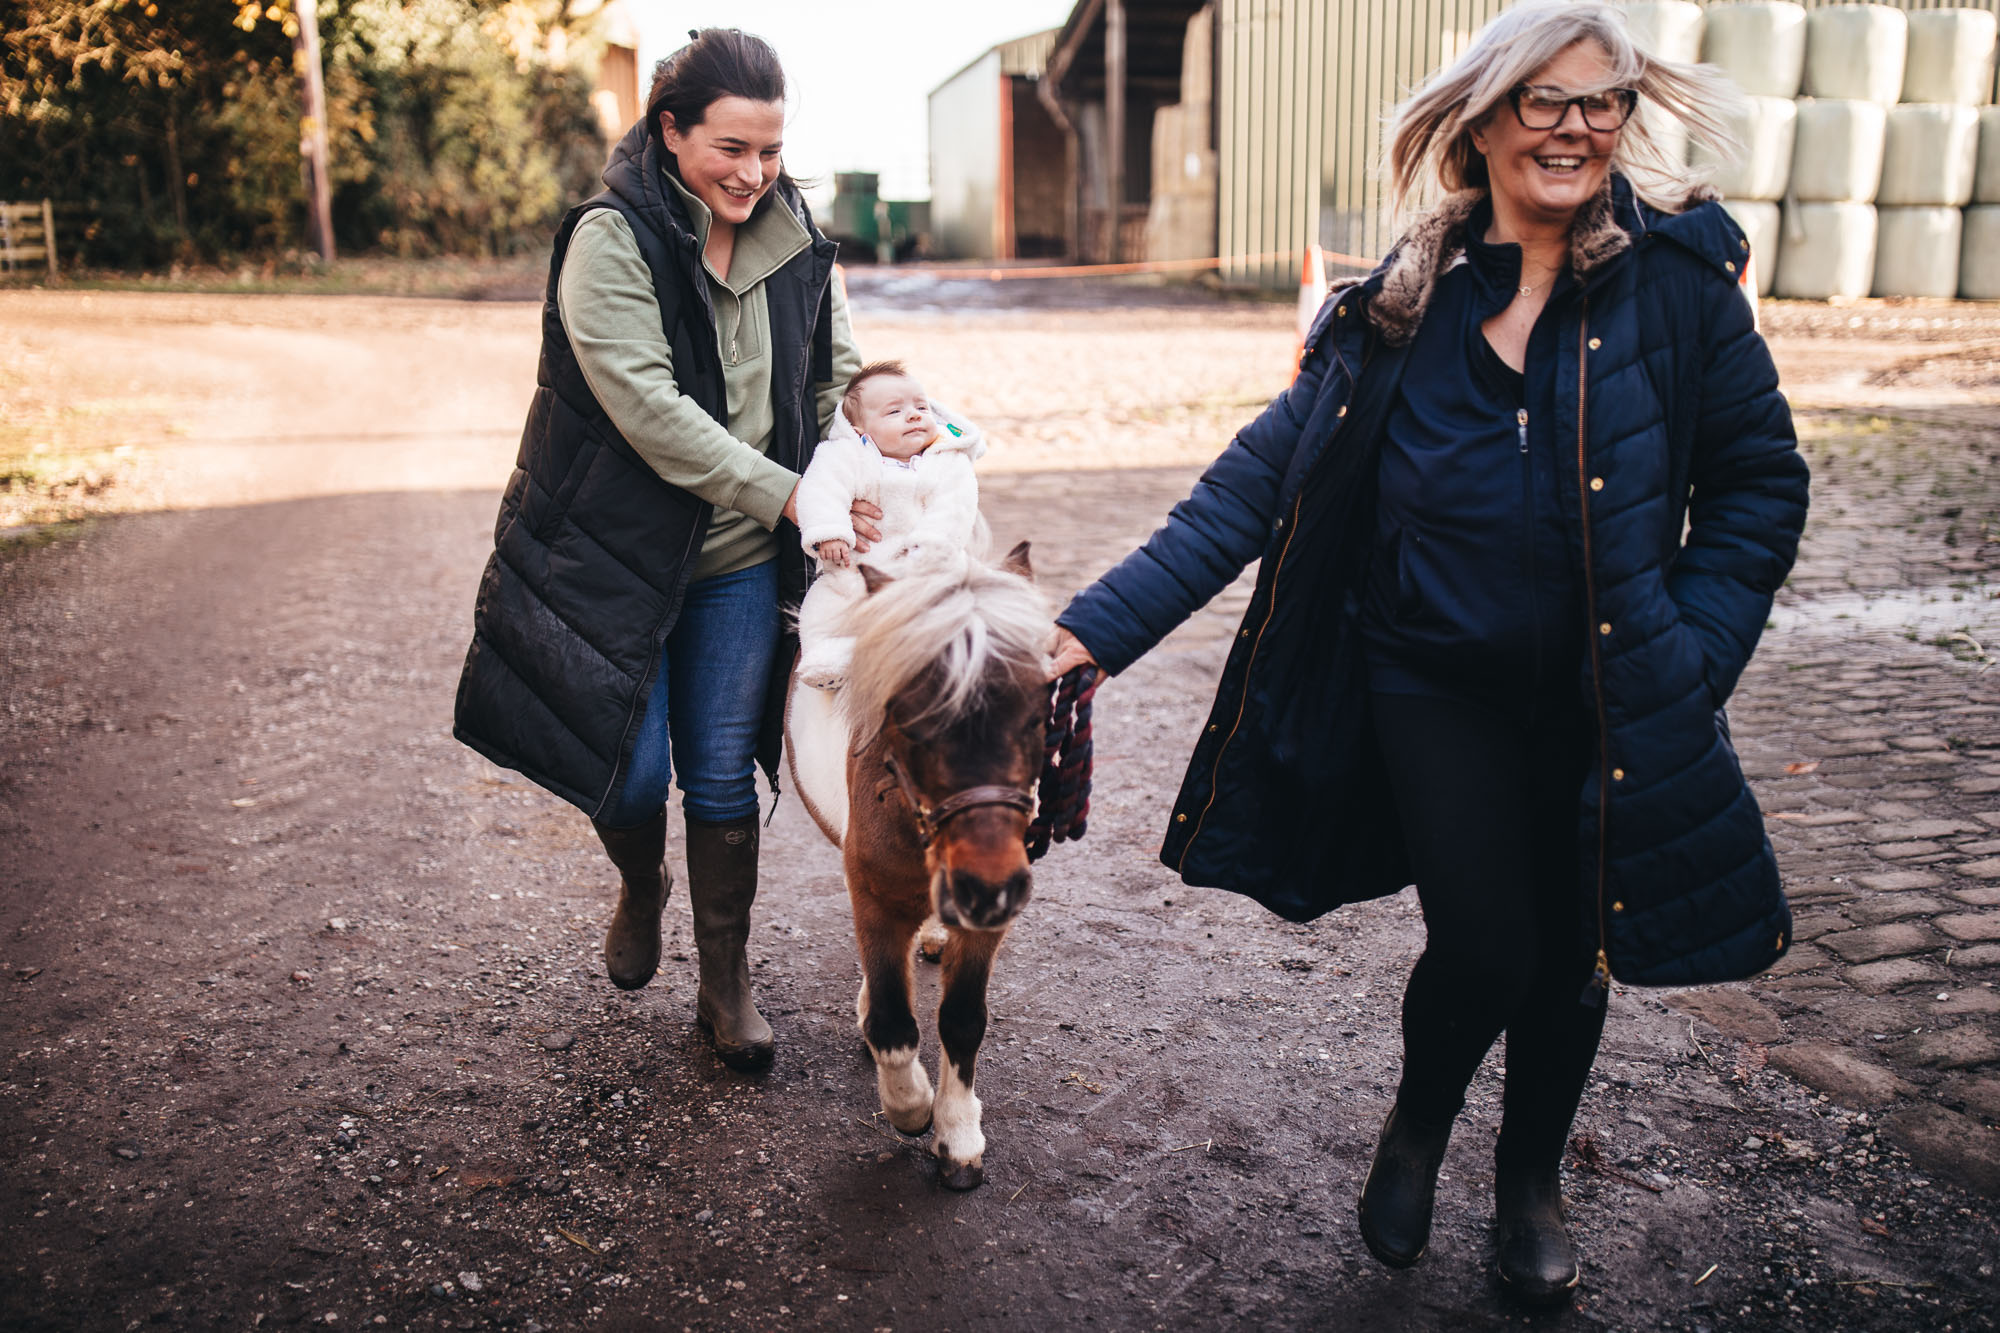 baby rides on horse helped by mother and grandma